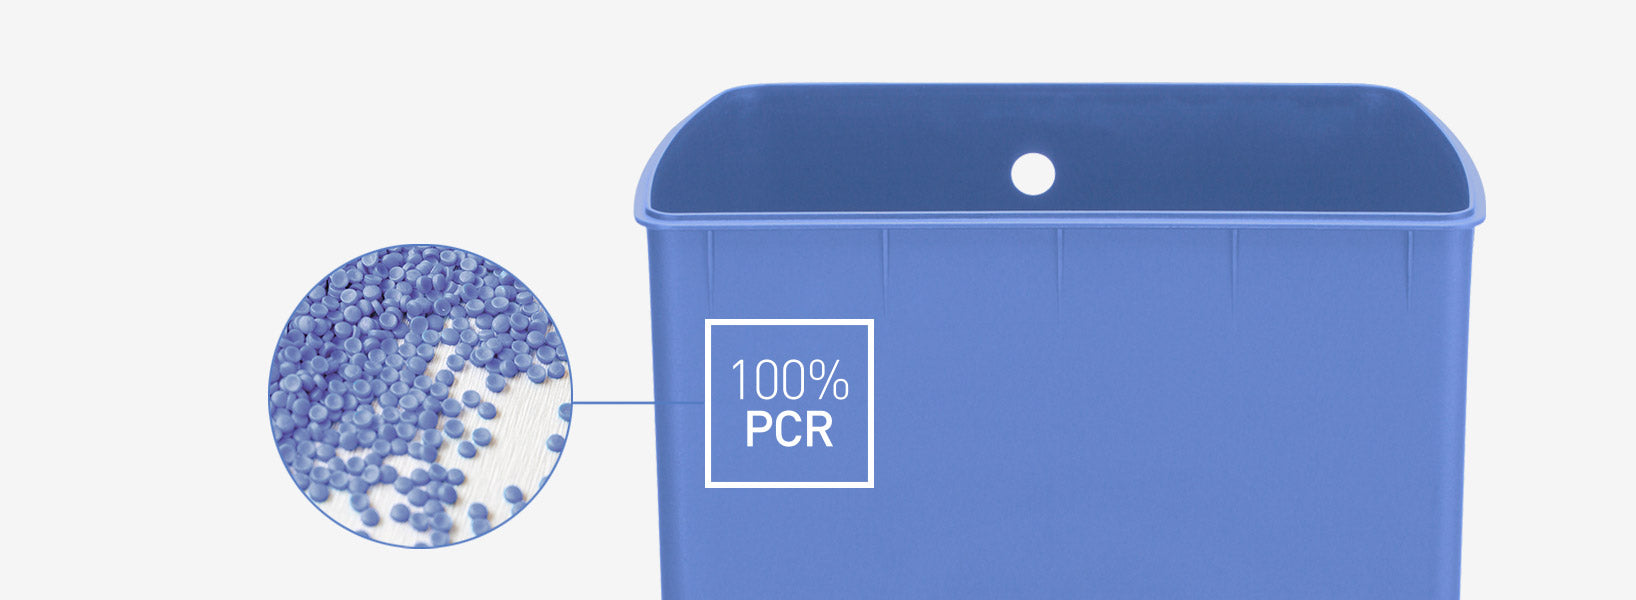 100% post-consumer recycled plastic